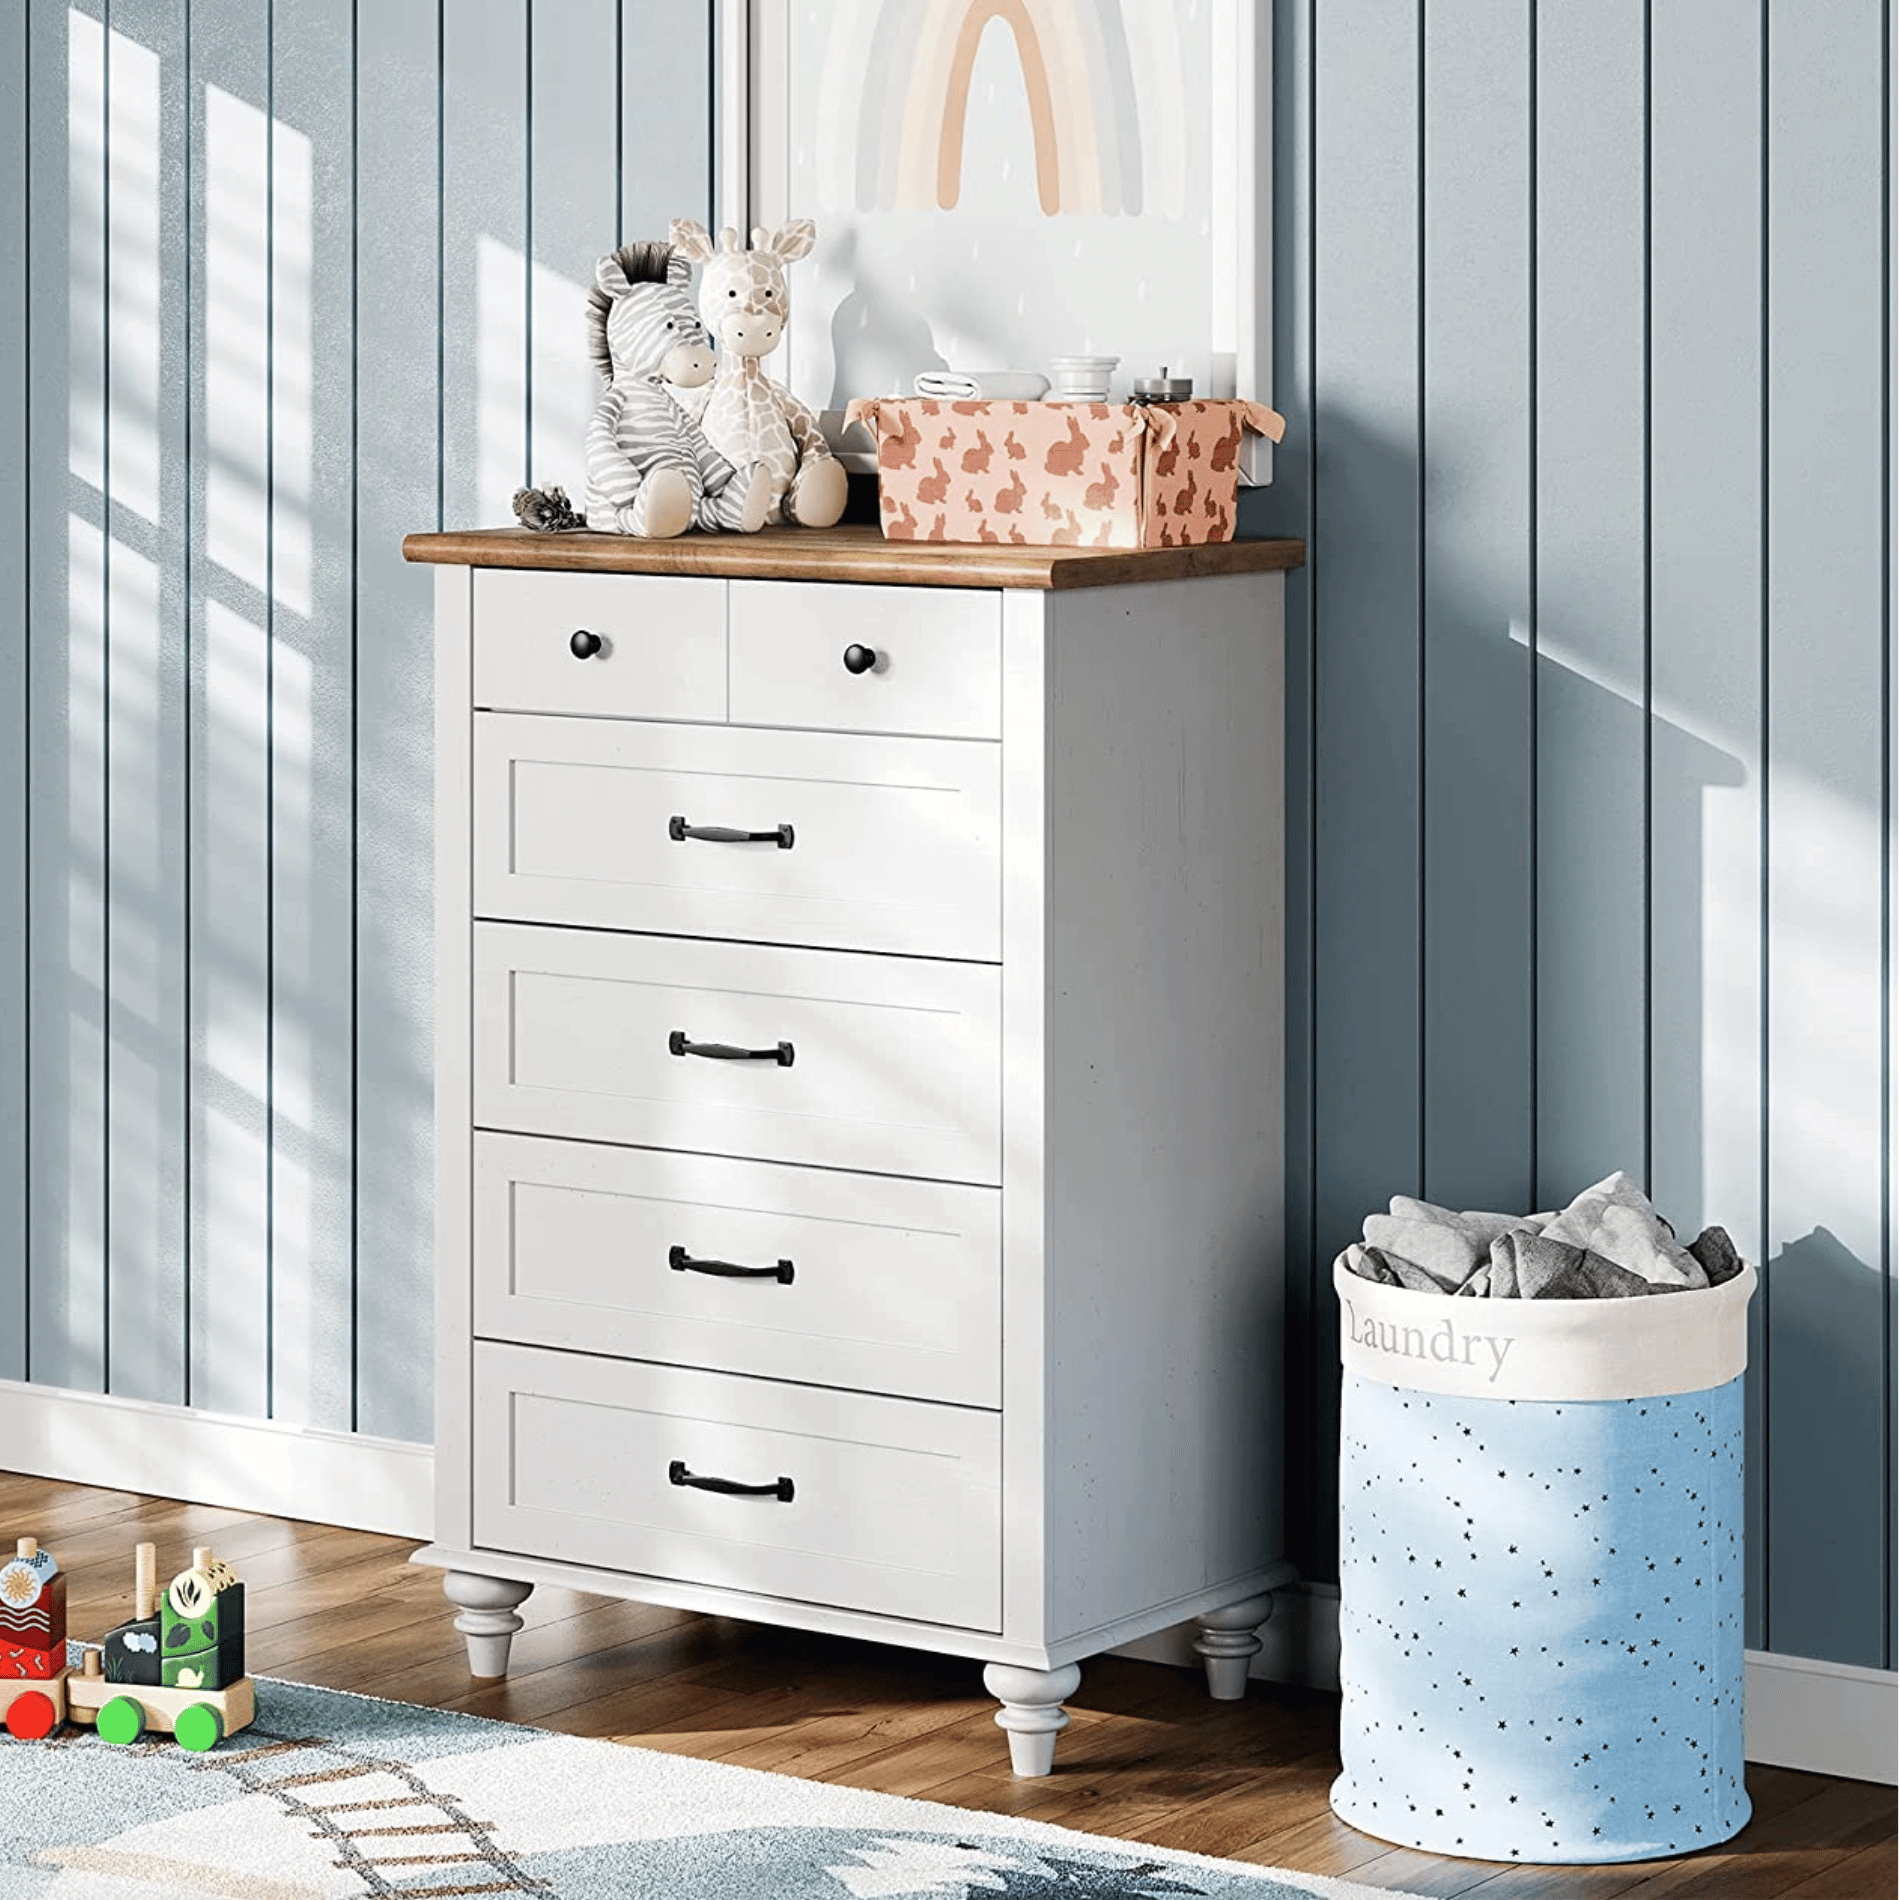  WAMPAT Dresser for Bedroom with 3 Drawers, White Kids